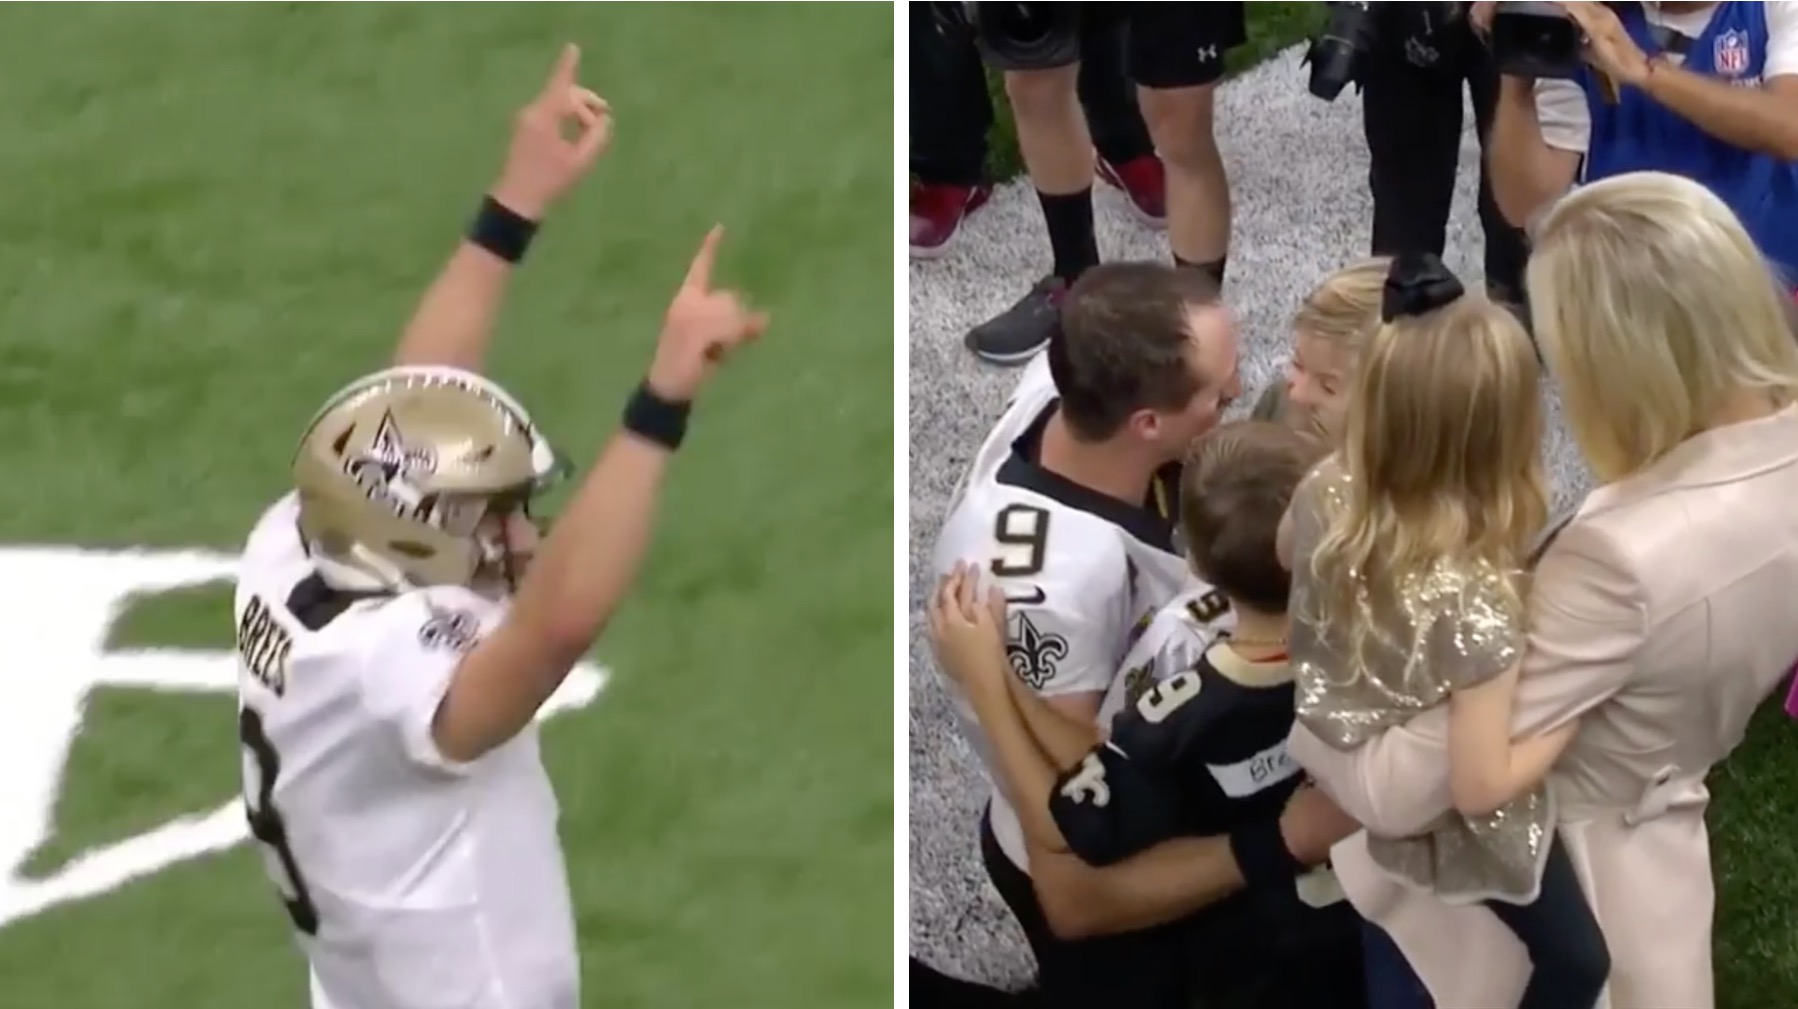 Drew Brees Breaks Record, Has Inspirational Huddle With Kids [WATCH]